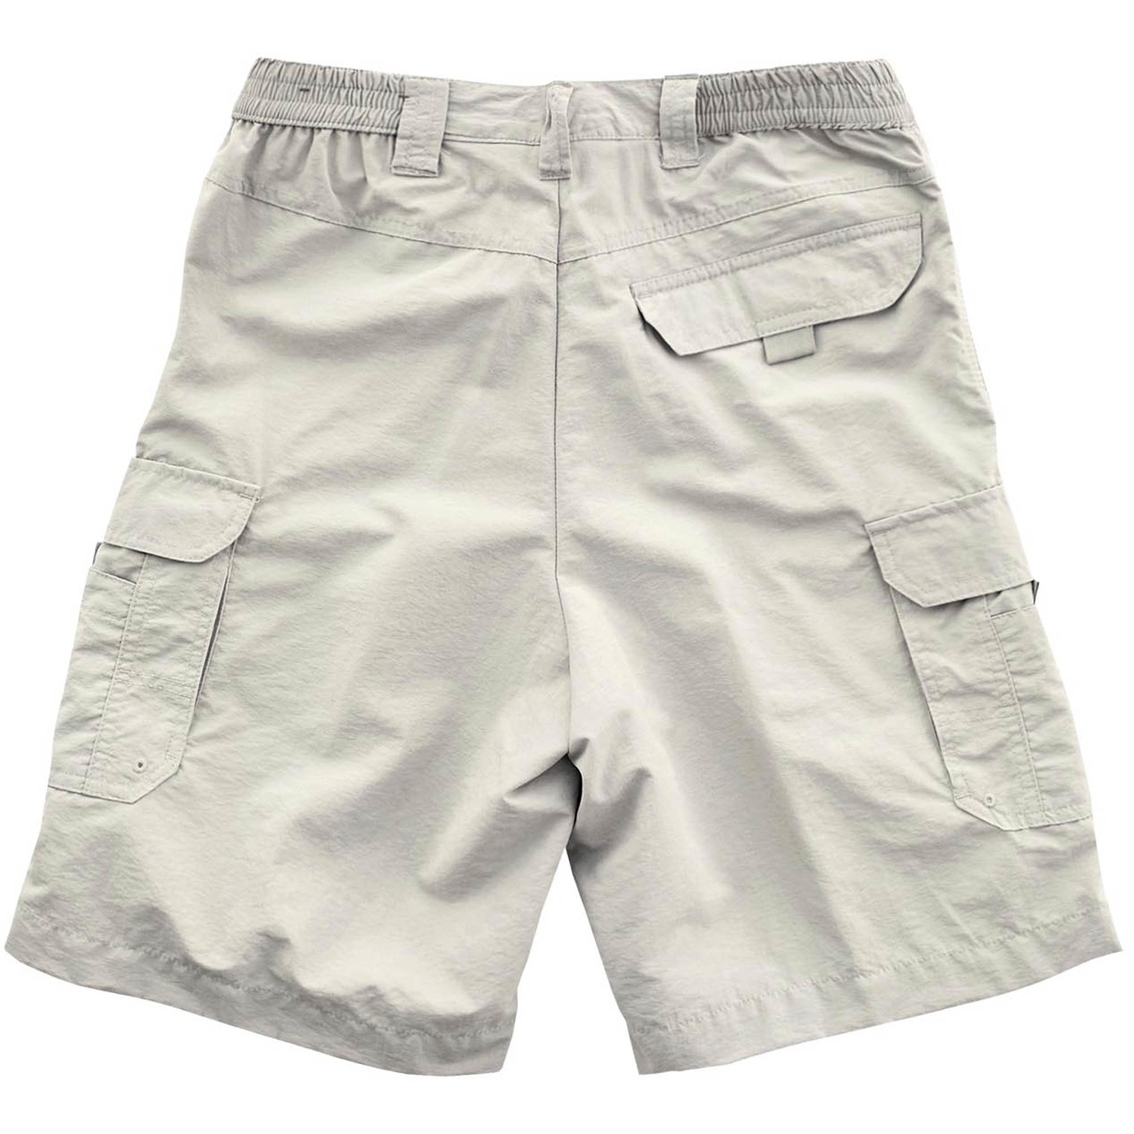 Joe Marlin Clearwater Cargo Shorts | Shorts | Clothing & Accessories ...